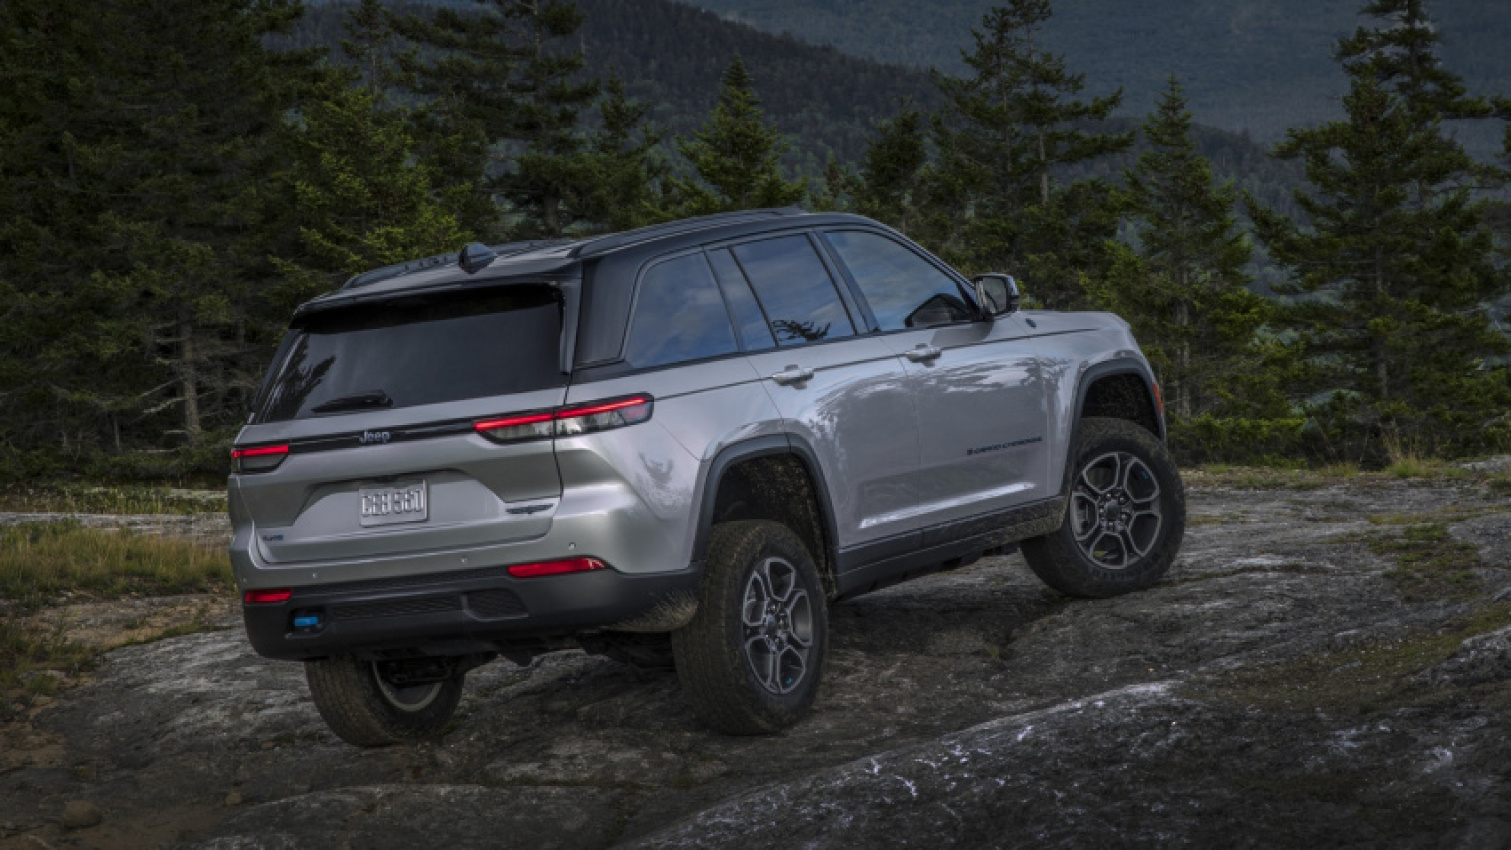 cars, hybrid cars, jeep, hybrids, jeep grand cherokee, jeep grand cherokee news, jeep news, plug-in hybrids, 2022 jeep grand cherokee 4xe plug-in hybrid goes 26 miles on a charge, gets 23 mpg on gasoline